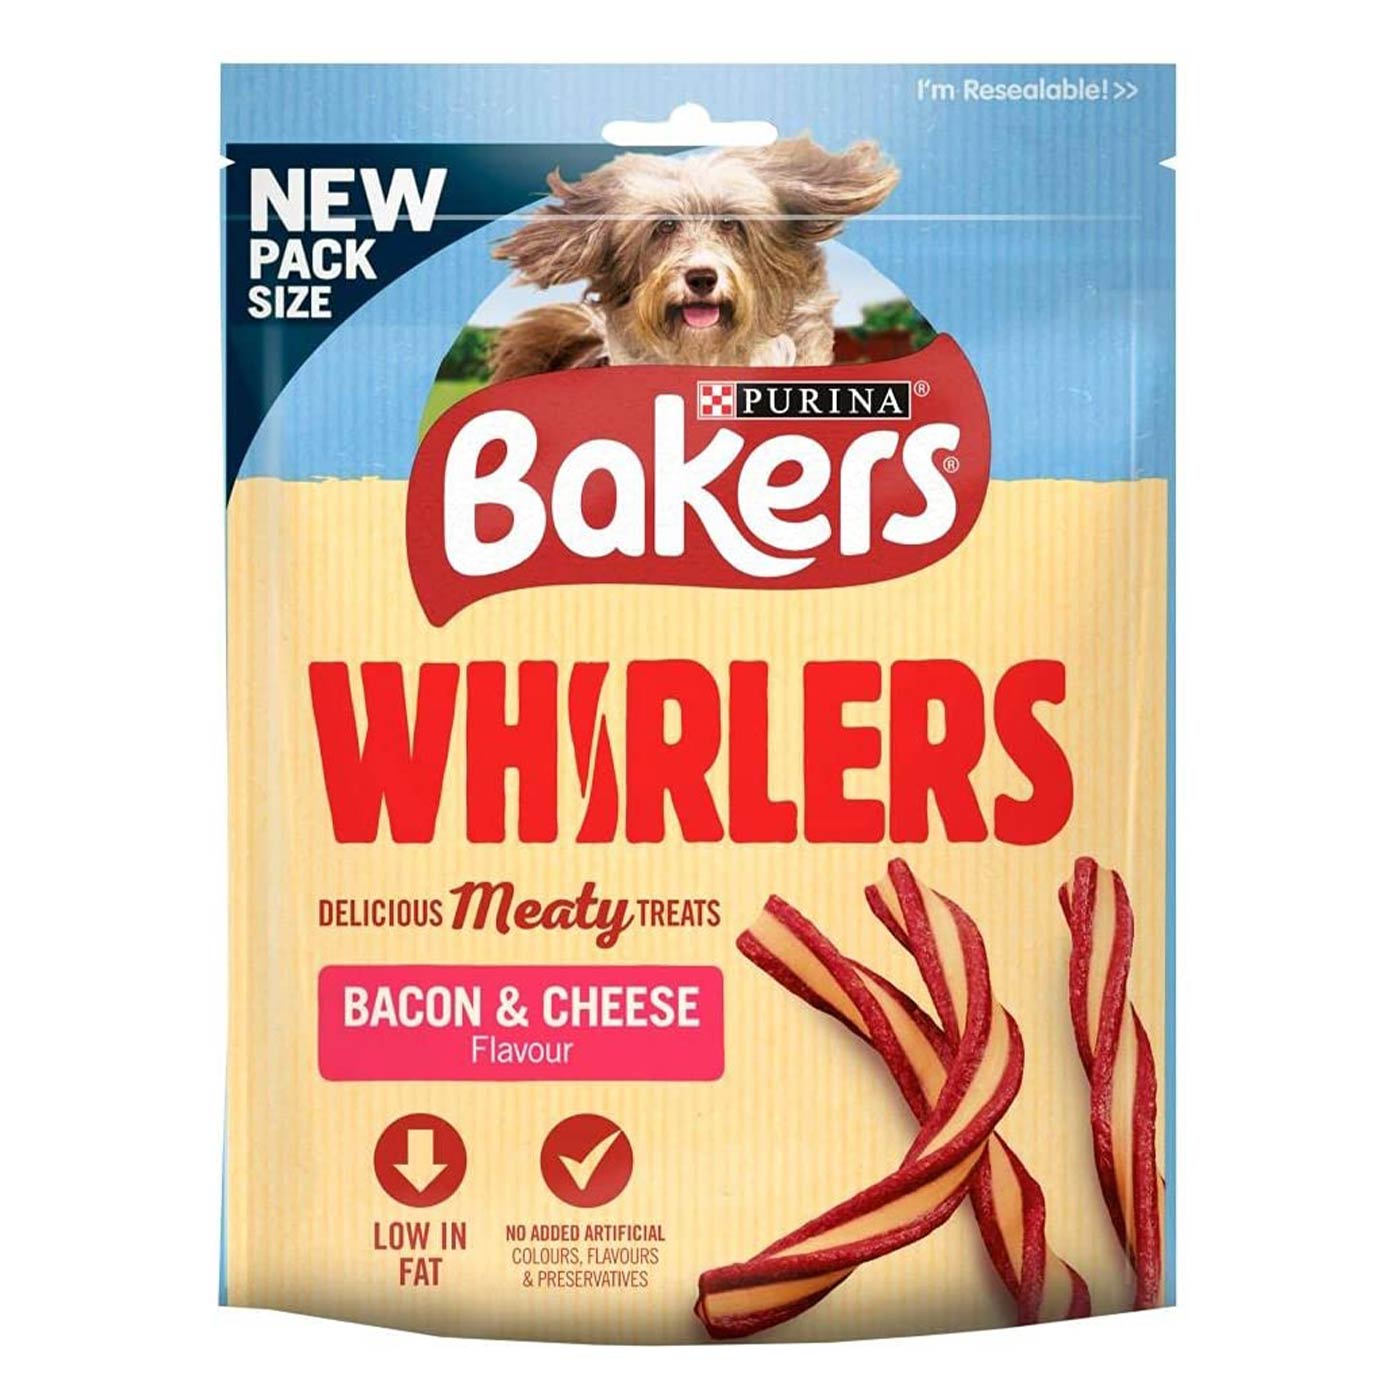 Bakers Whirlers Bacon and Cheese Dog Treats 130g